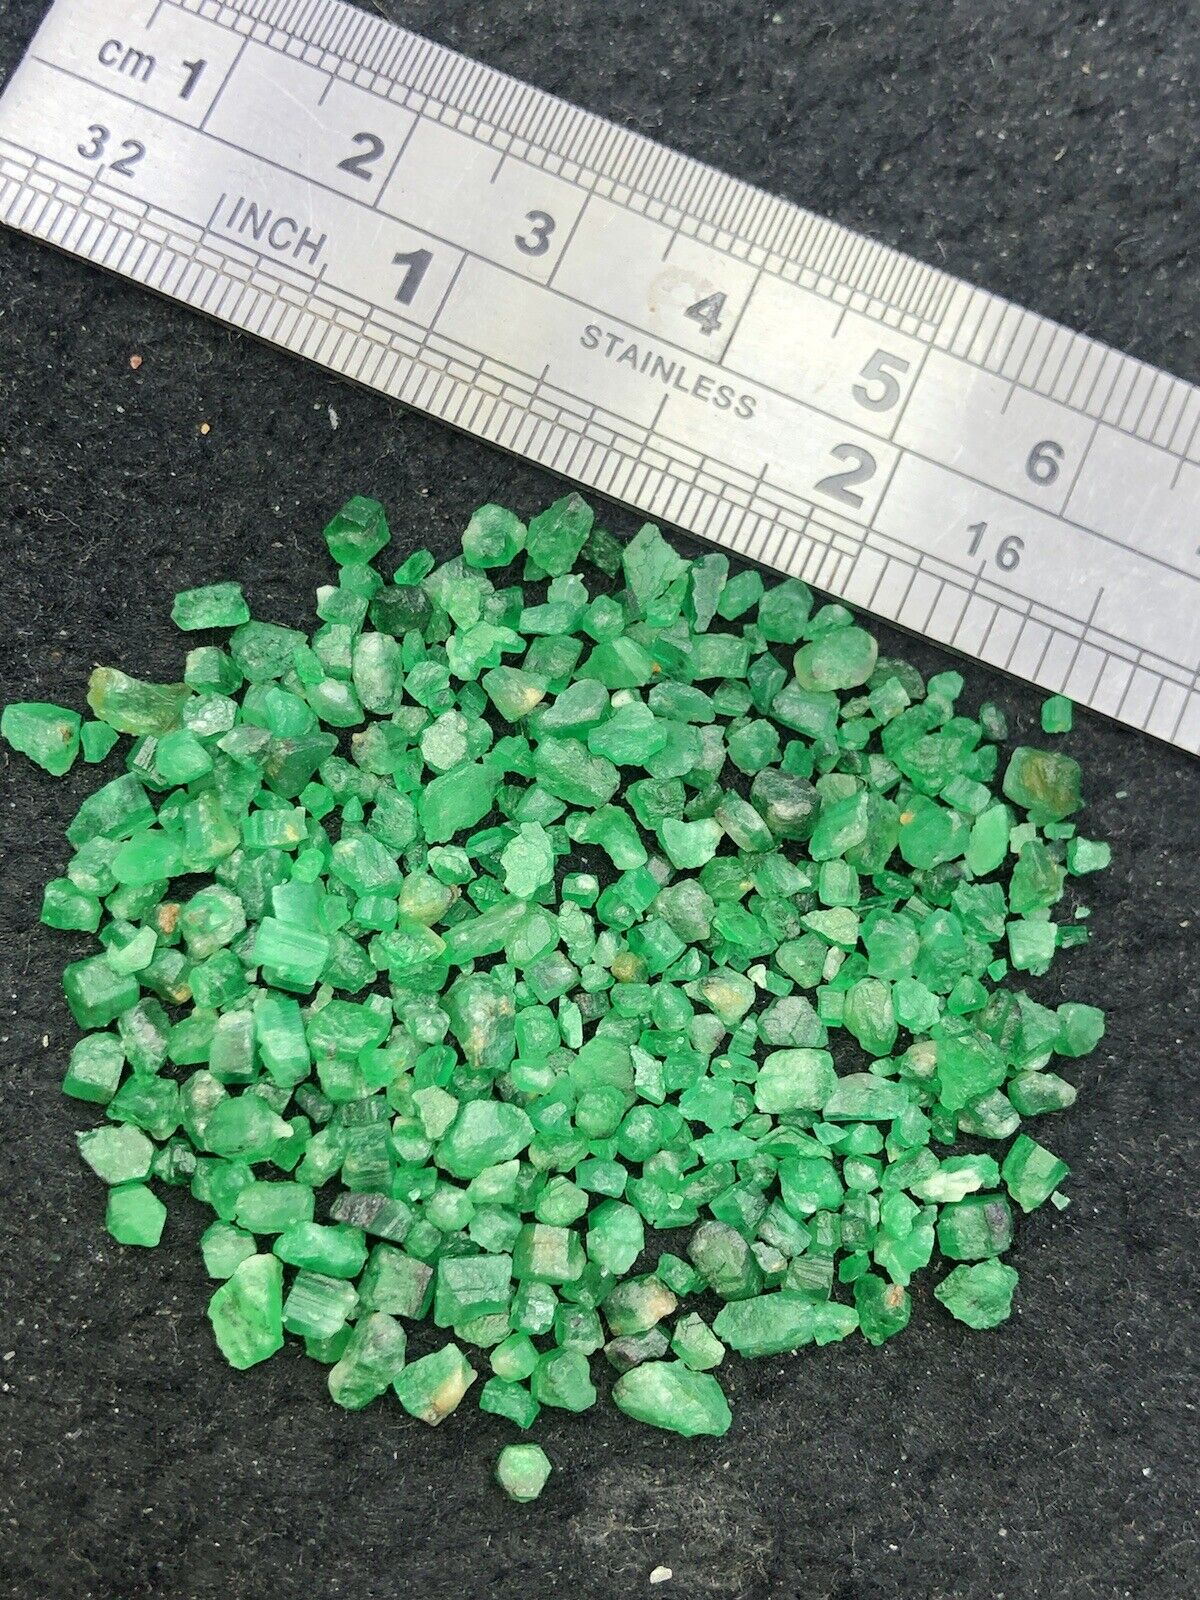 37 Carat Natural Emerald Crystal From Swat Pakistani Jewellery size